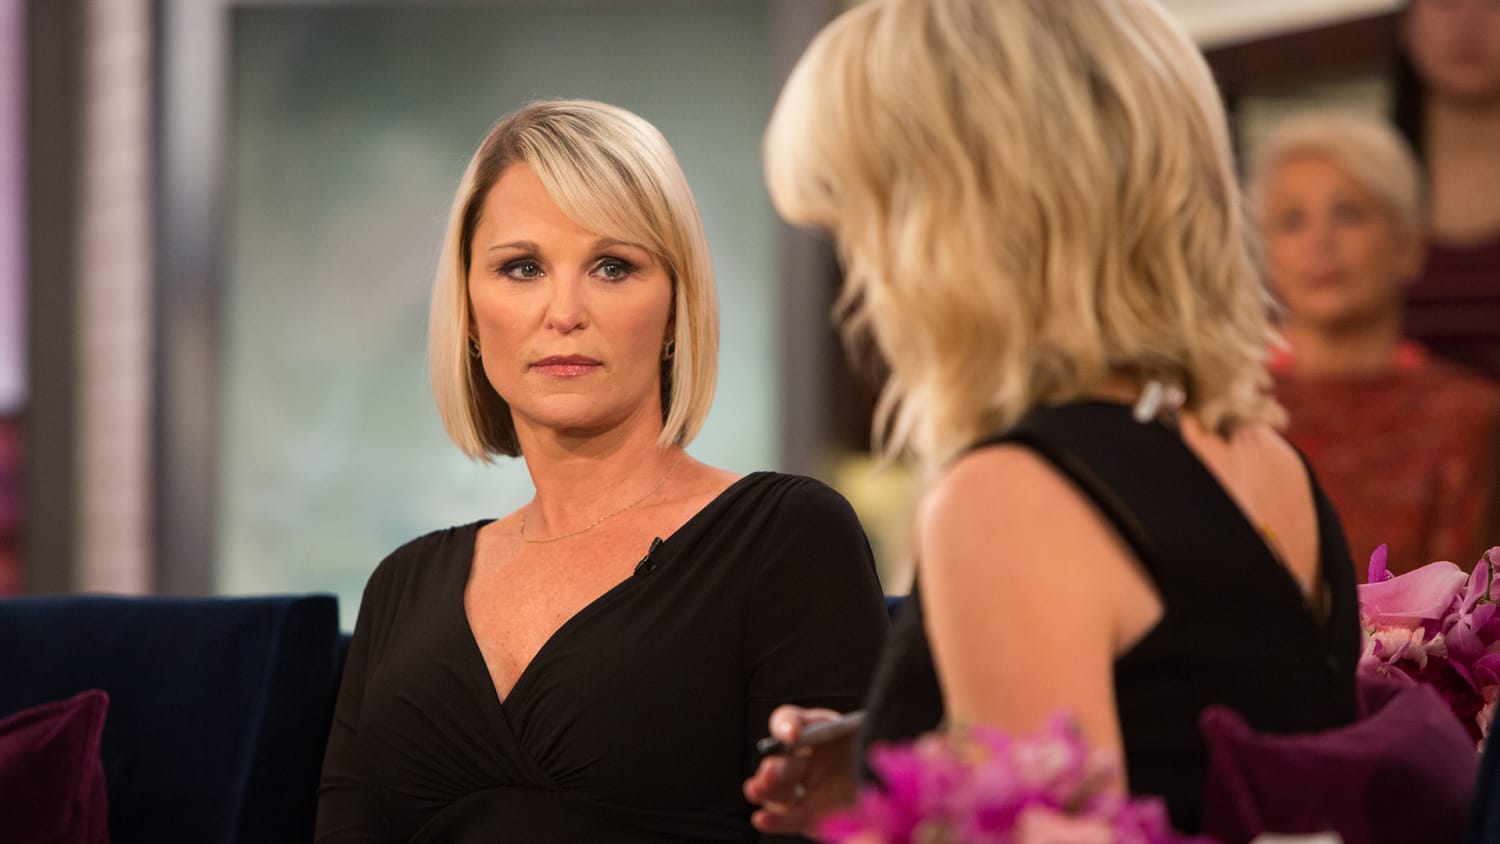 Bill OReilly accuser Juliet Huddy on speaking out Women like me are lightning rods